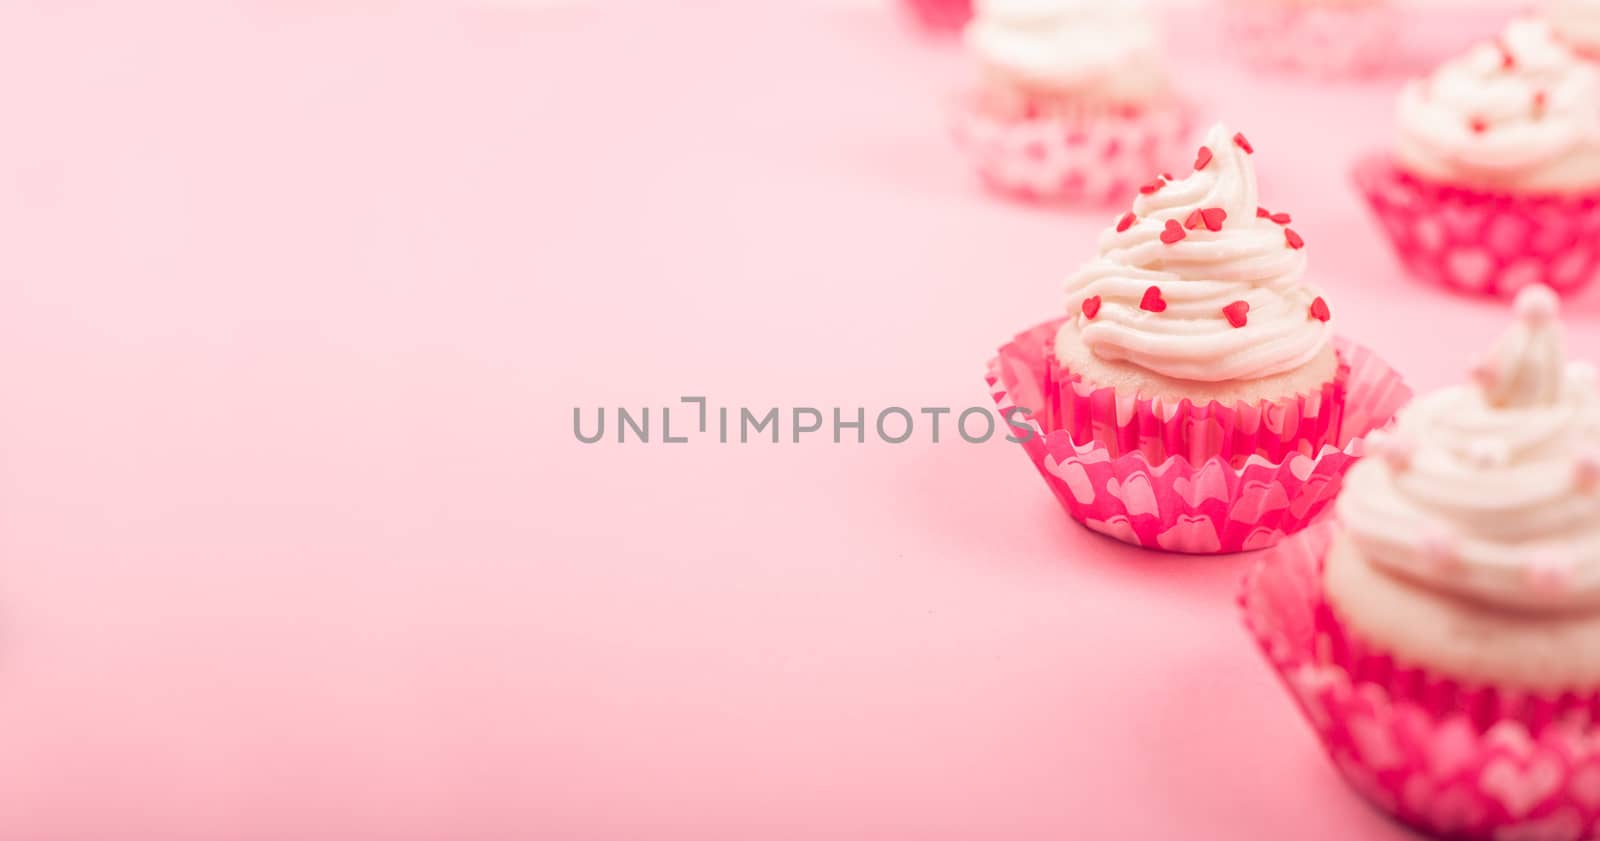 Valentine day love cupcakes decorated with cream and hearts on pink background with copy space for text